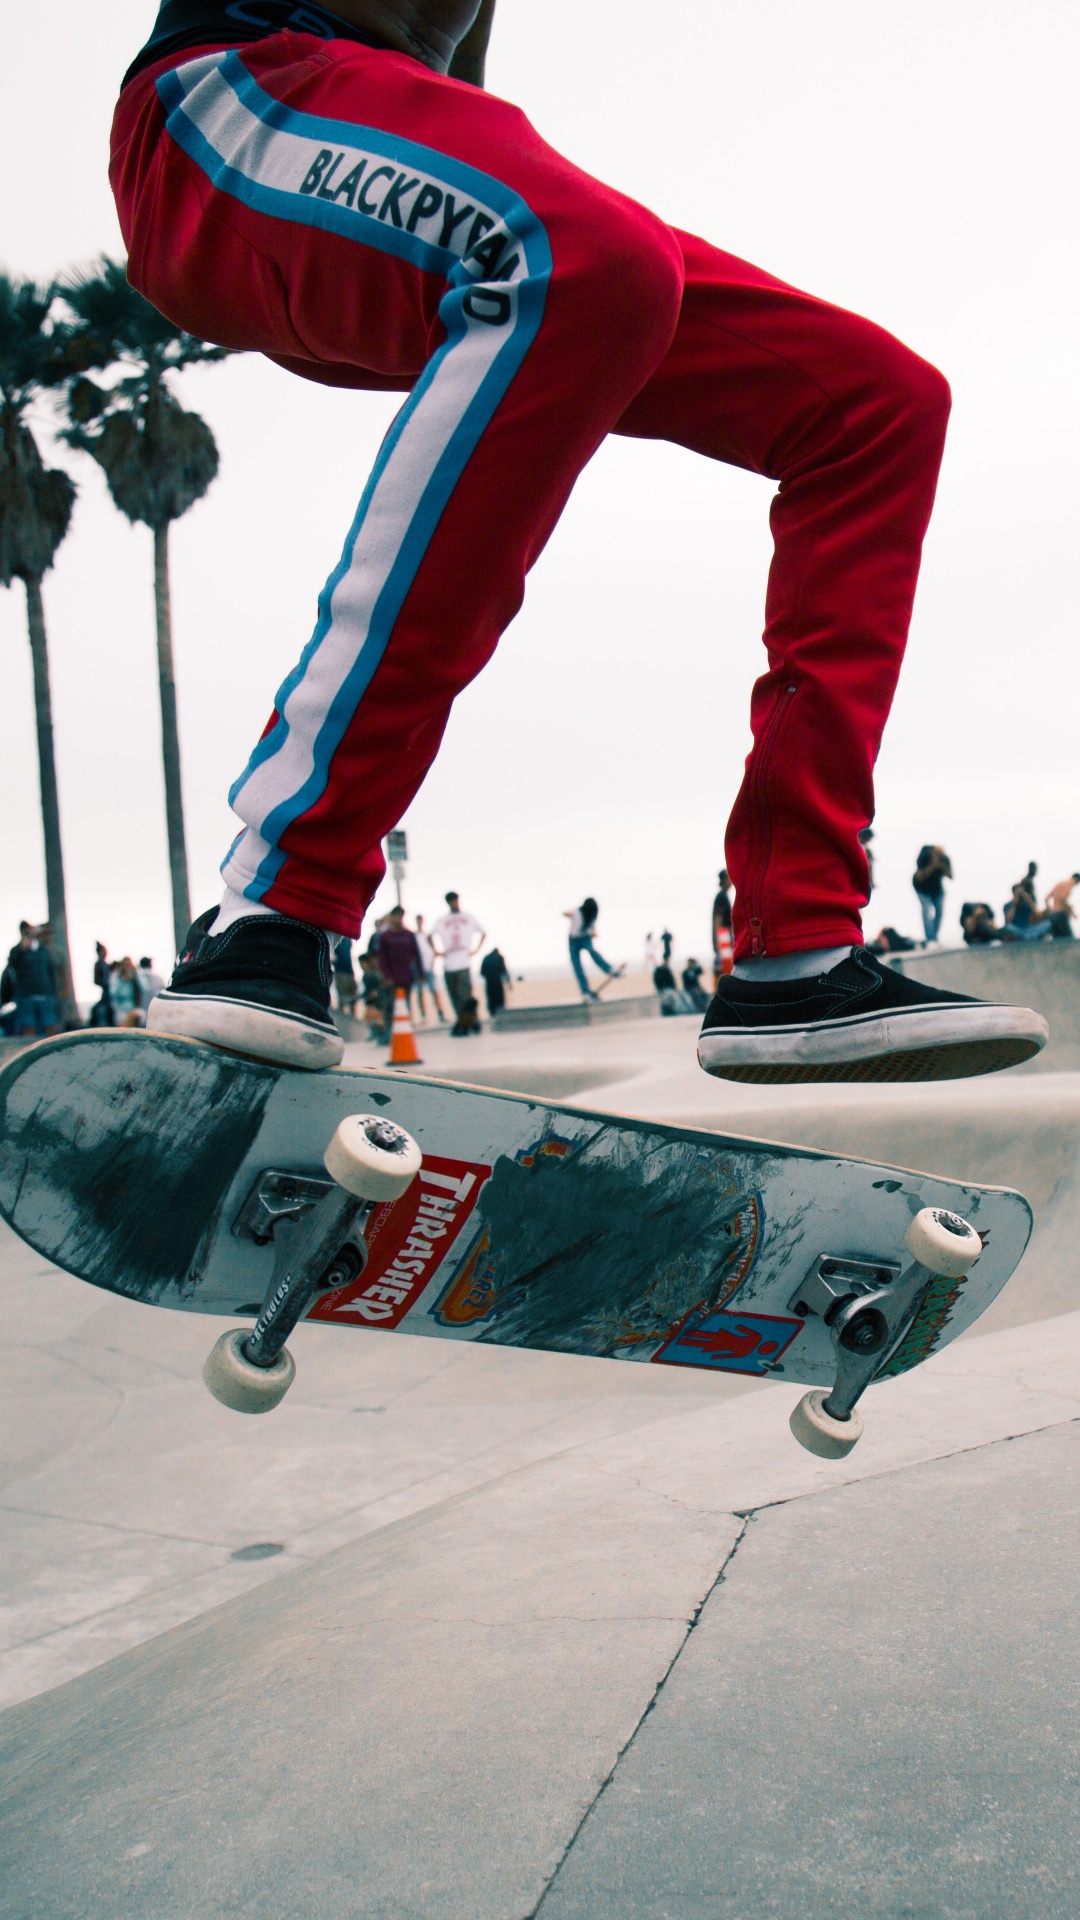 Man in Red Pants and Black and White Sneakers Riding Skateboard. Wallpaper in 1080x1920 Resolution